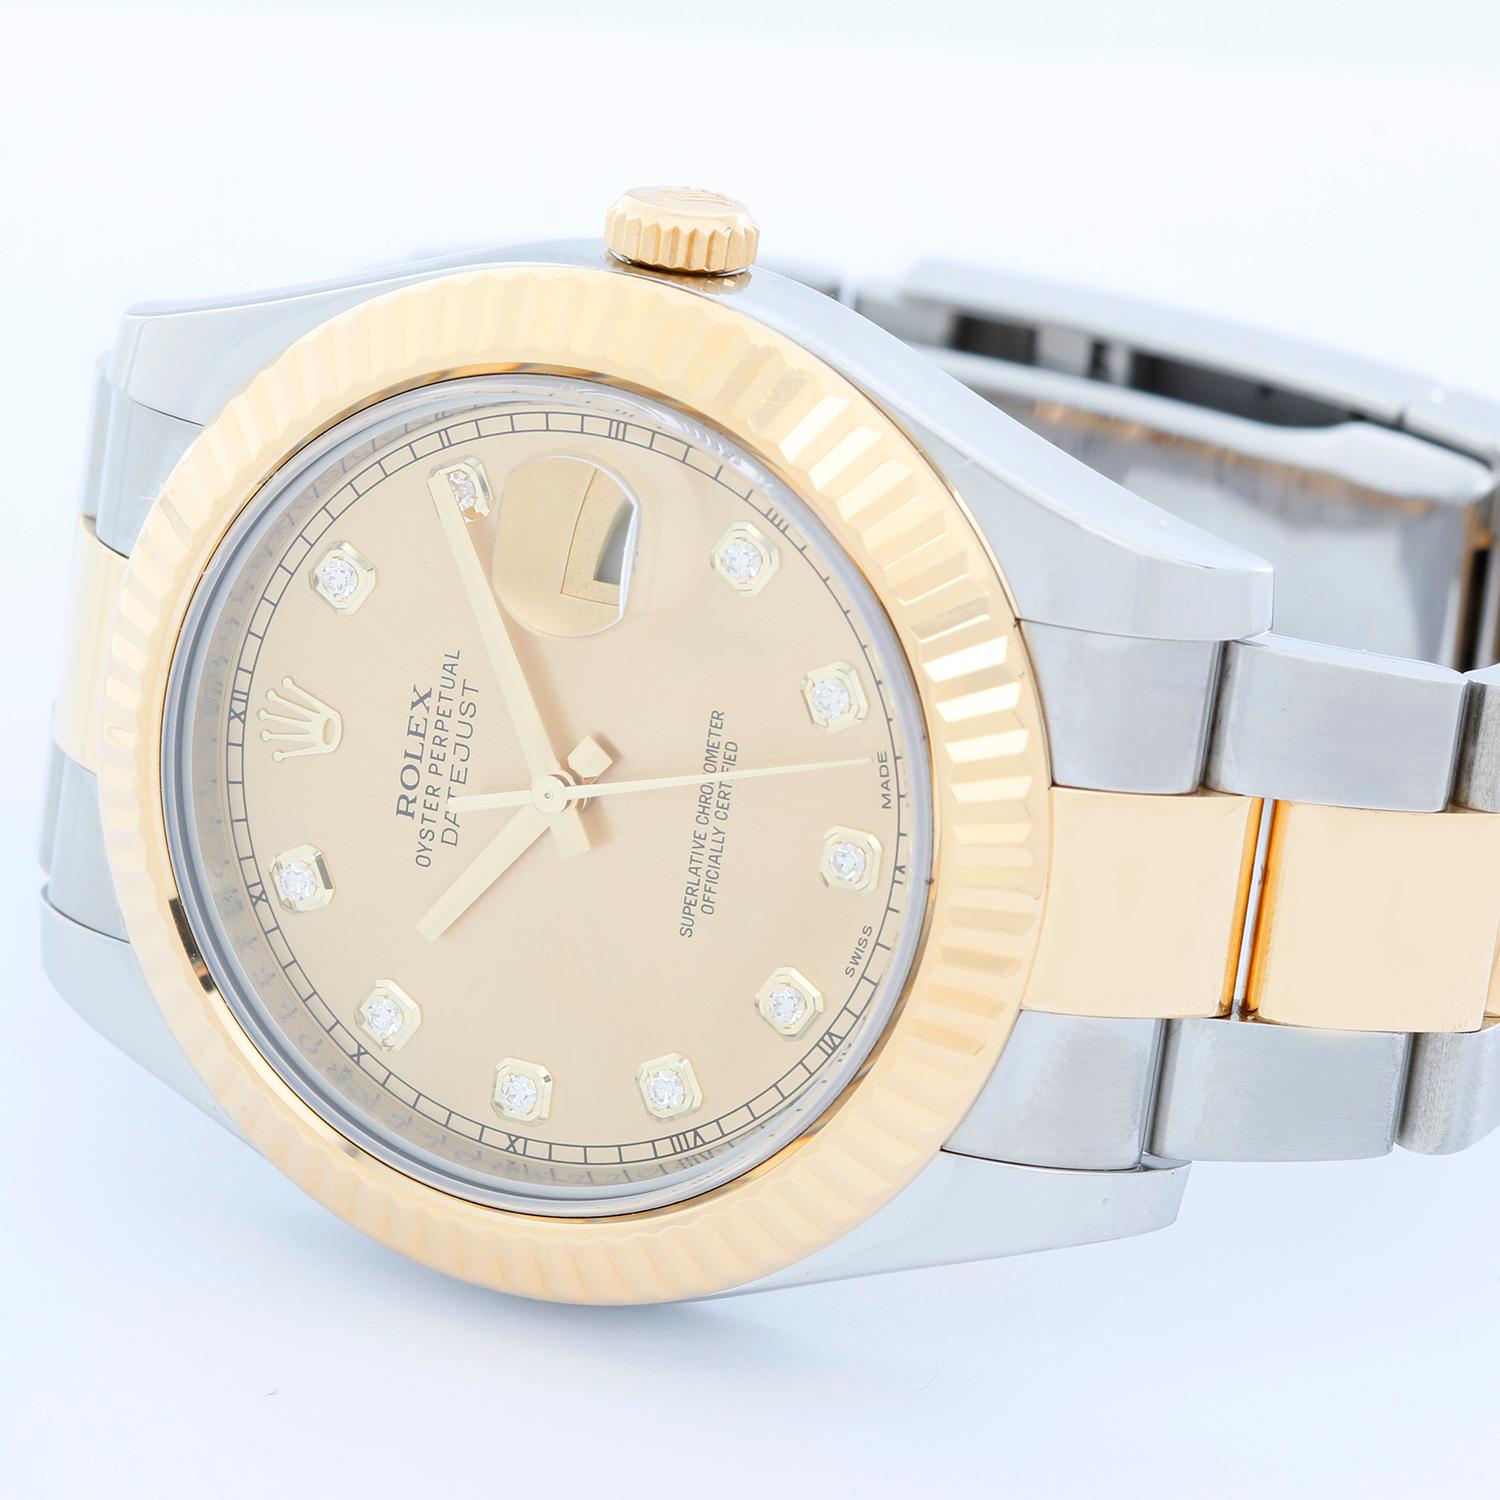 Rolex Datejust Men's 2-Tone Watch 116333 - Automatic winding, 31 jewels, Quickset, sapphire crystal. Stainless steel case with 18k yellow gold fluted bezel  (41mm diameter). Champagne dial with factory diamond markers. Stainless steel and 18k yellow